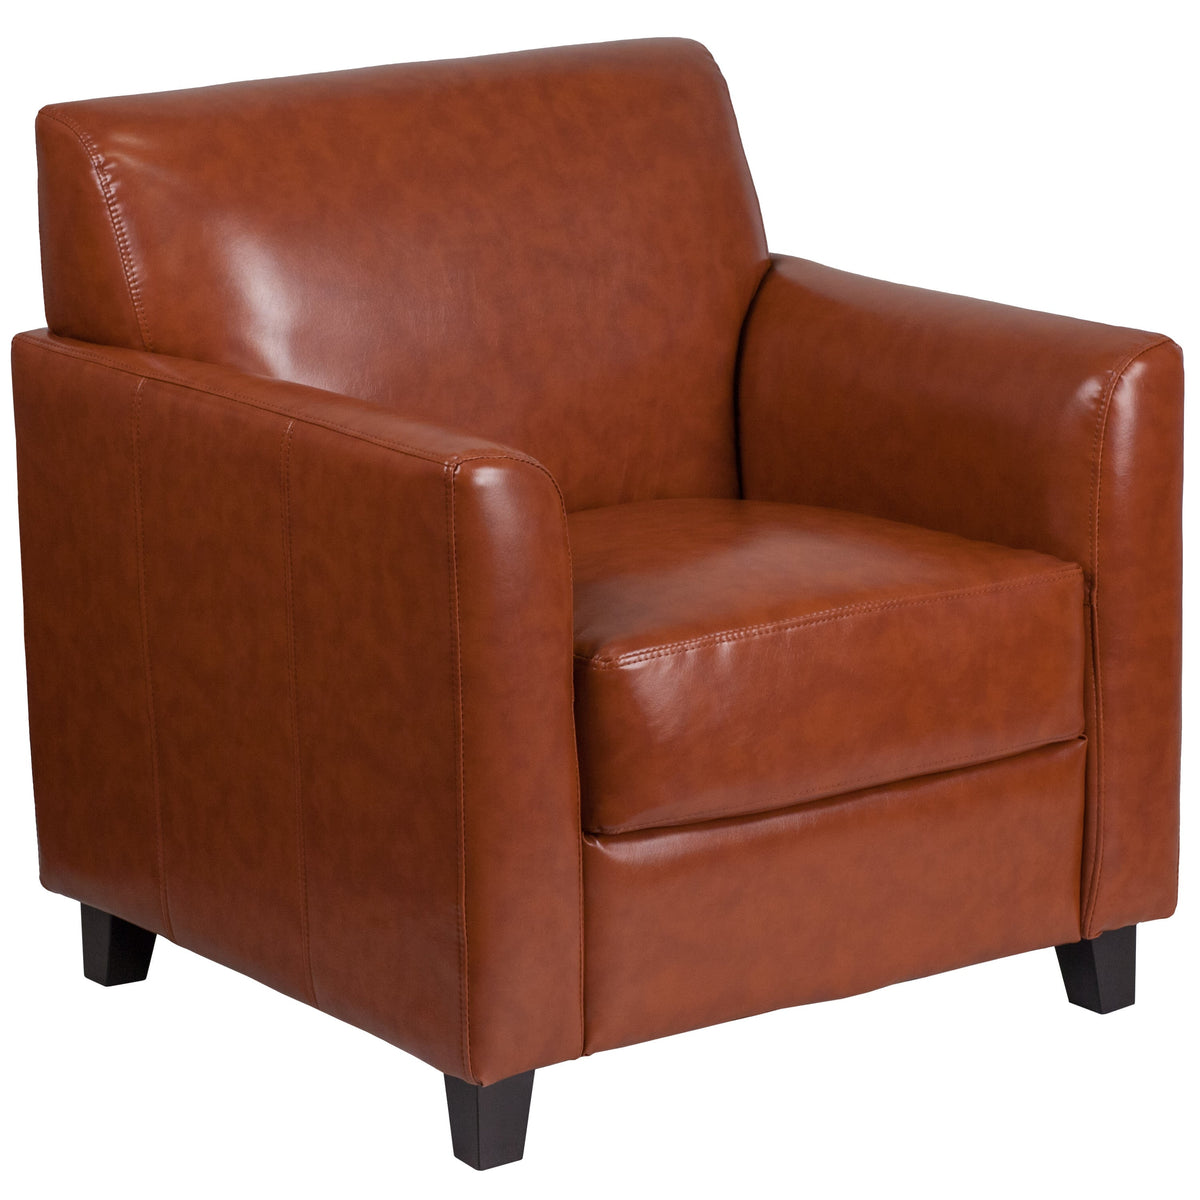 Cognac |#| Cognac LeatherSoft Chair with Clean Line Stitched Frame - Reception Seating